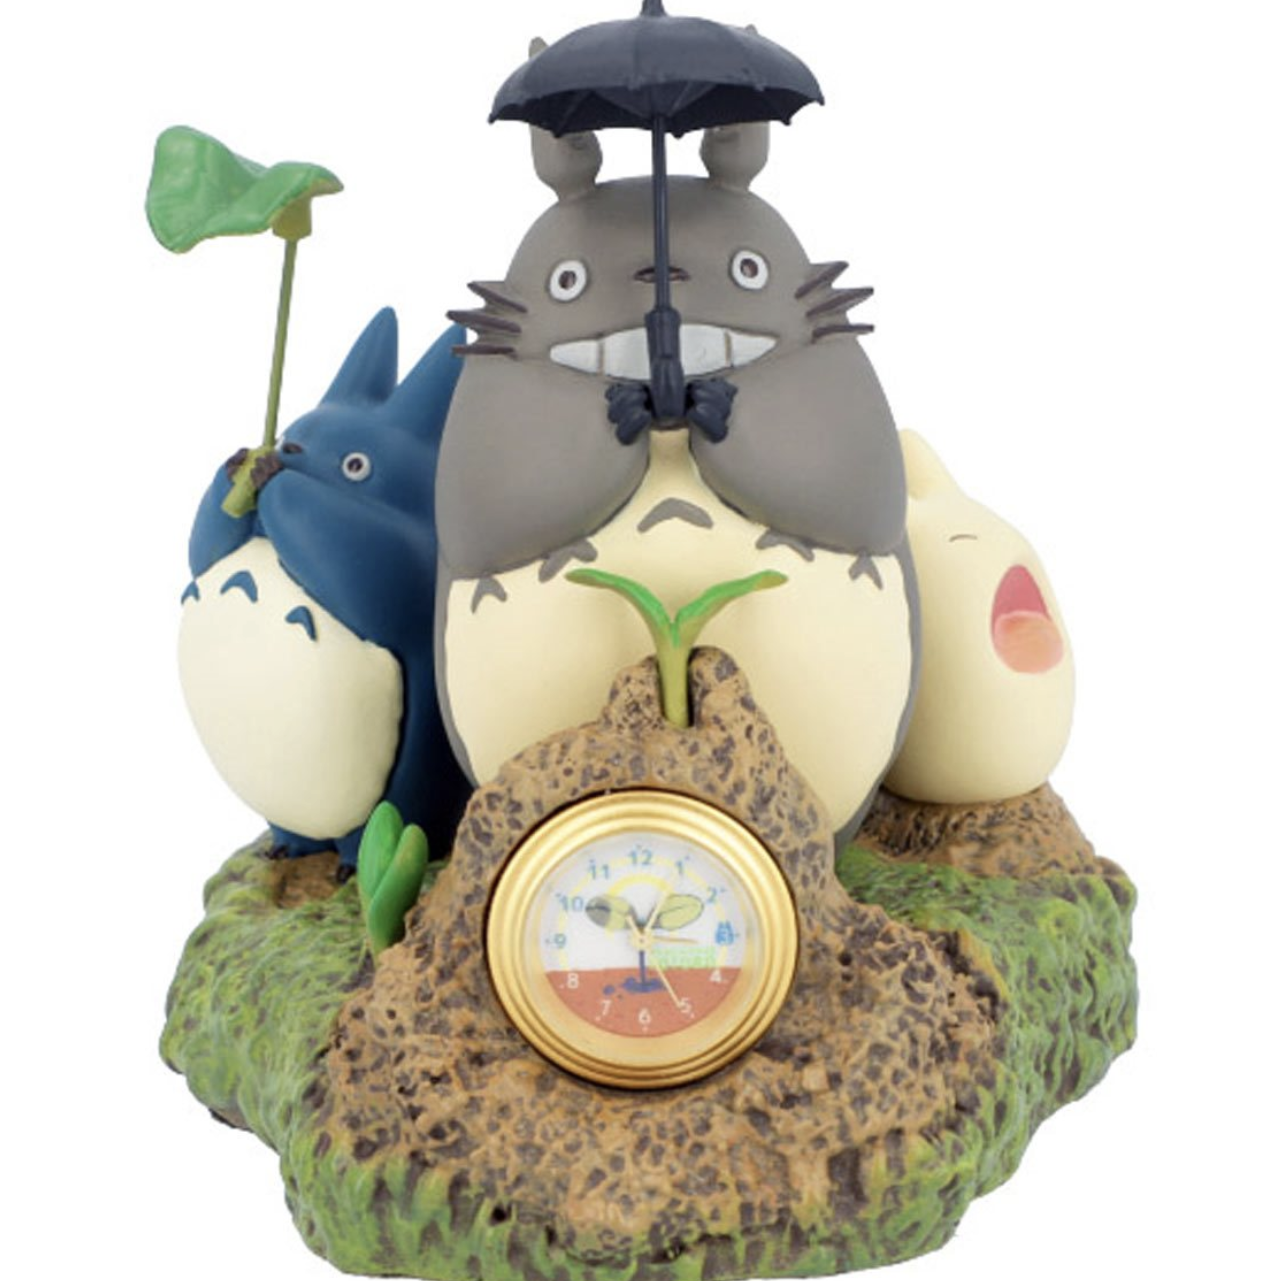 19 Studio Ghibli Products You Might Want To Spend All Your Money On